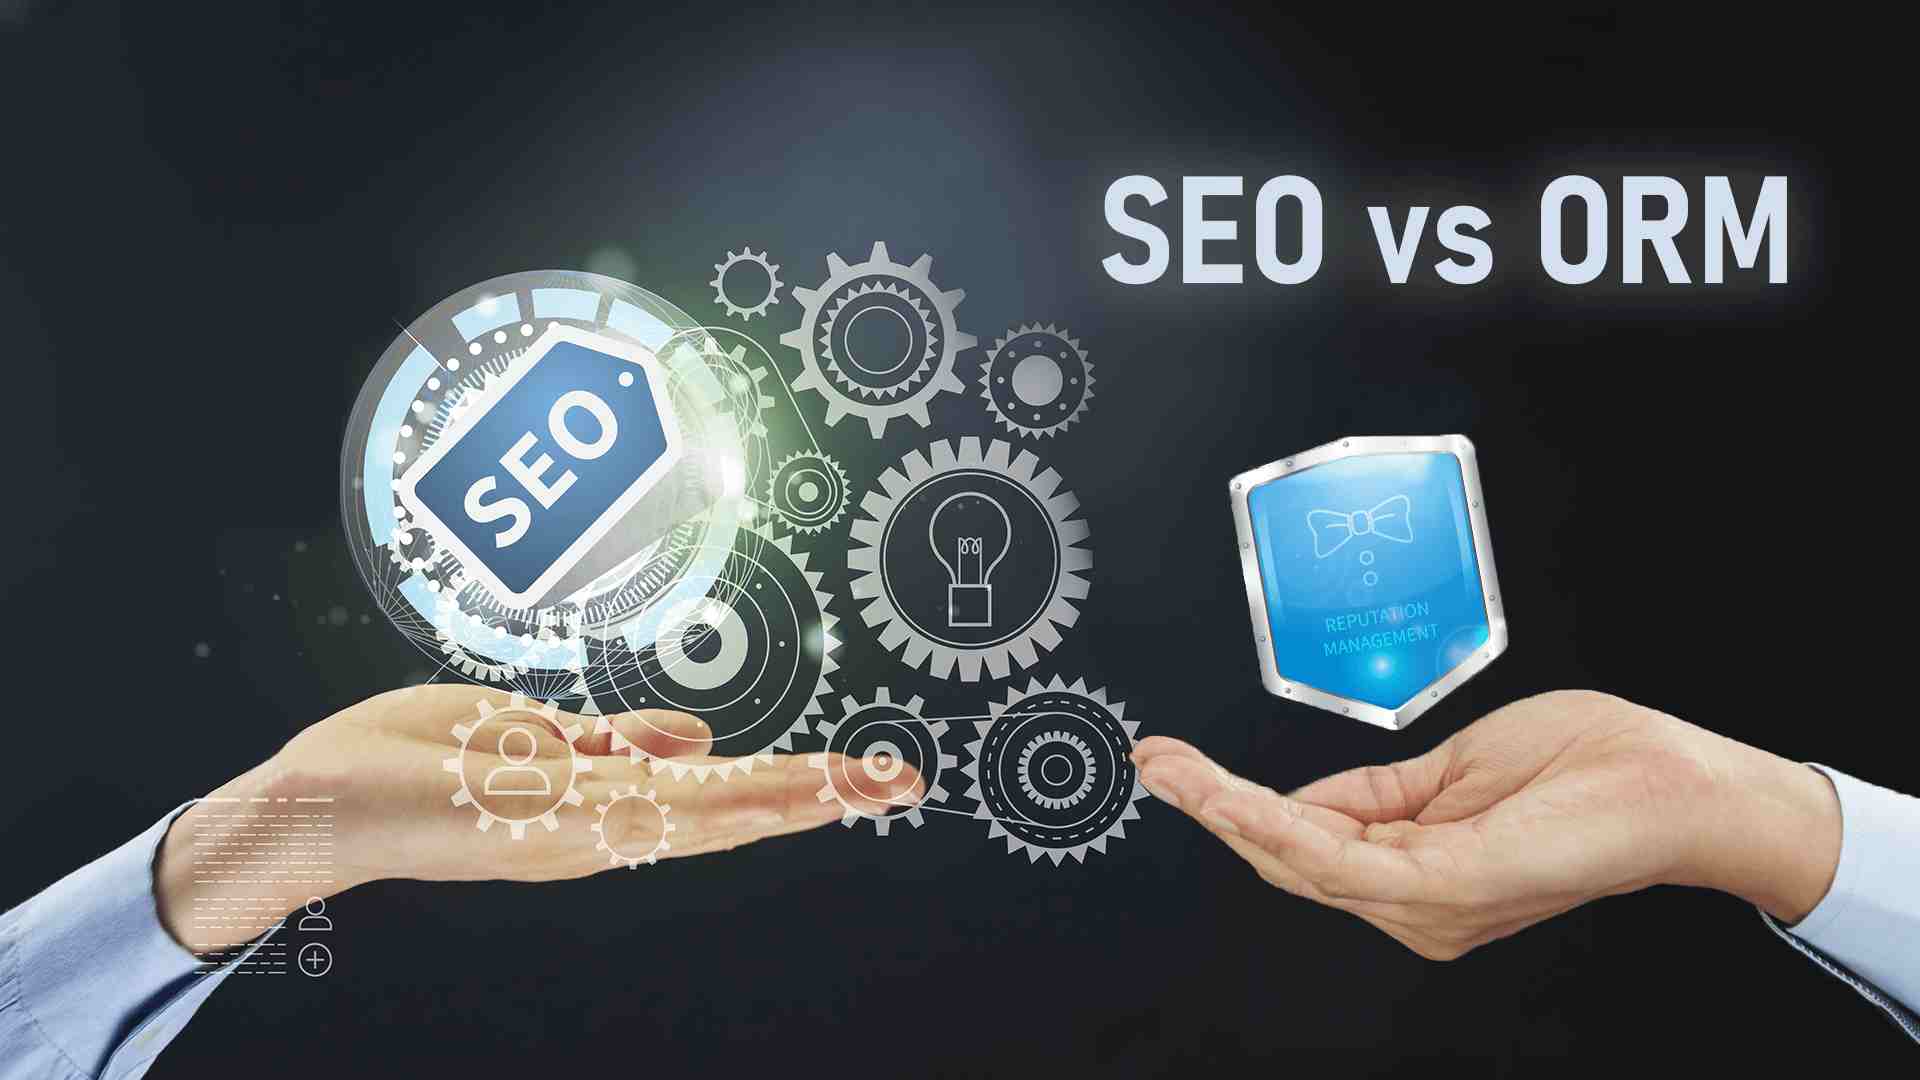 Online Reputation Management and SEO: How Are They Connected?